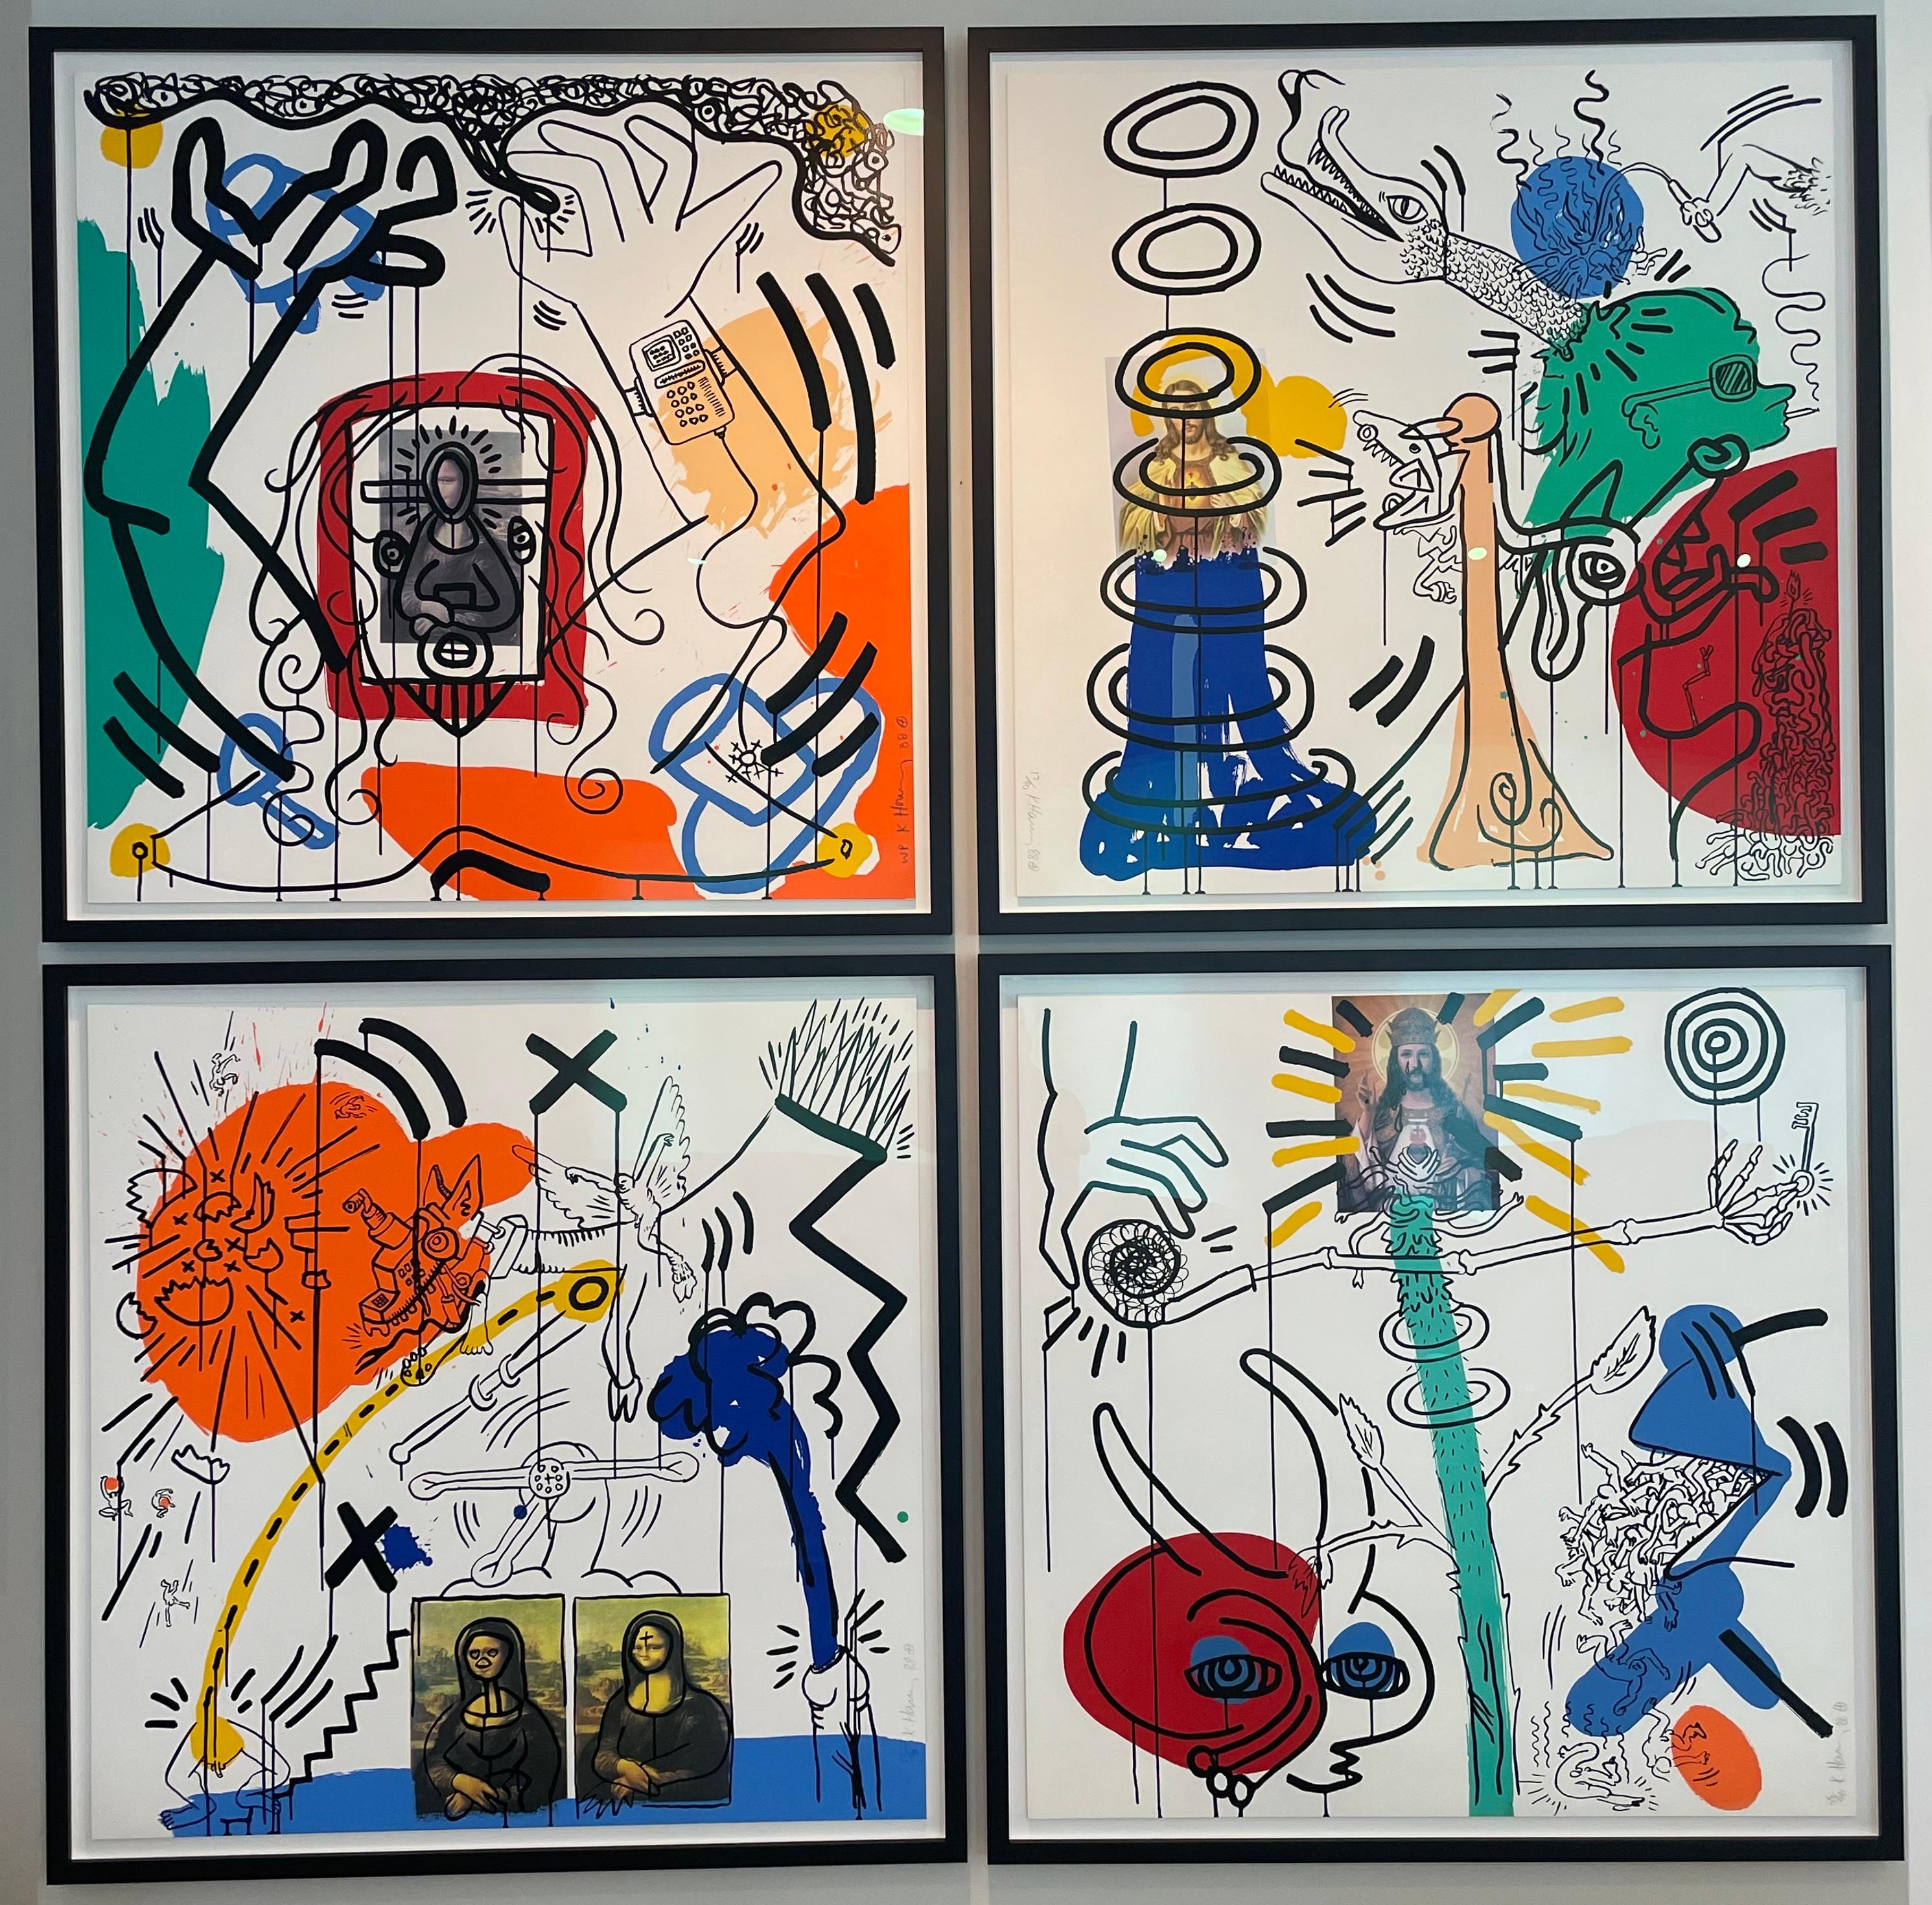 Artist: Keith Haring 
Title: Apocalypse 2
Size:  38 × 38 in  96.5 × 96.5 cm
Medium: Screenprint in colors on Lenox Museum Board
Edition: 22 of 90 
Year: 1988
Notes: Hand-signed by artist, Signed, numbered, and dated in pencil. Published by George